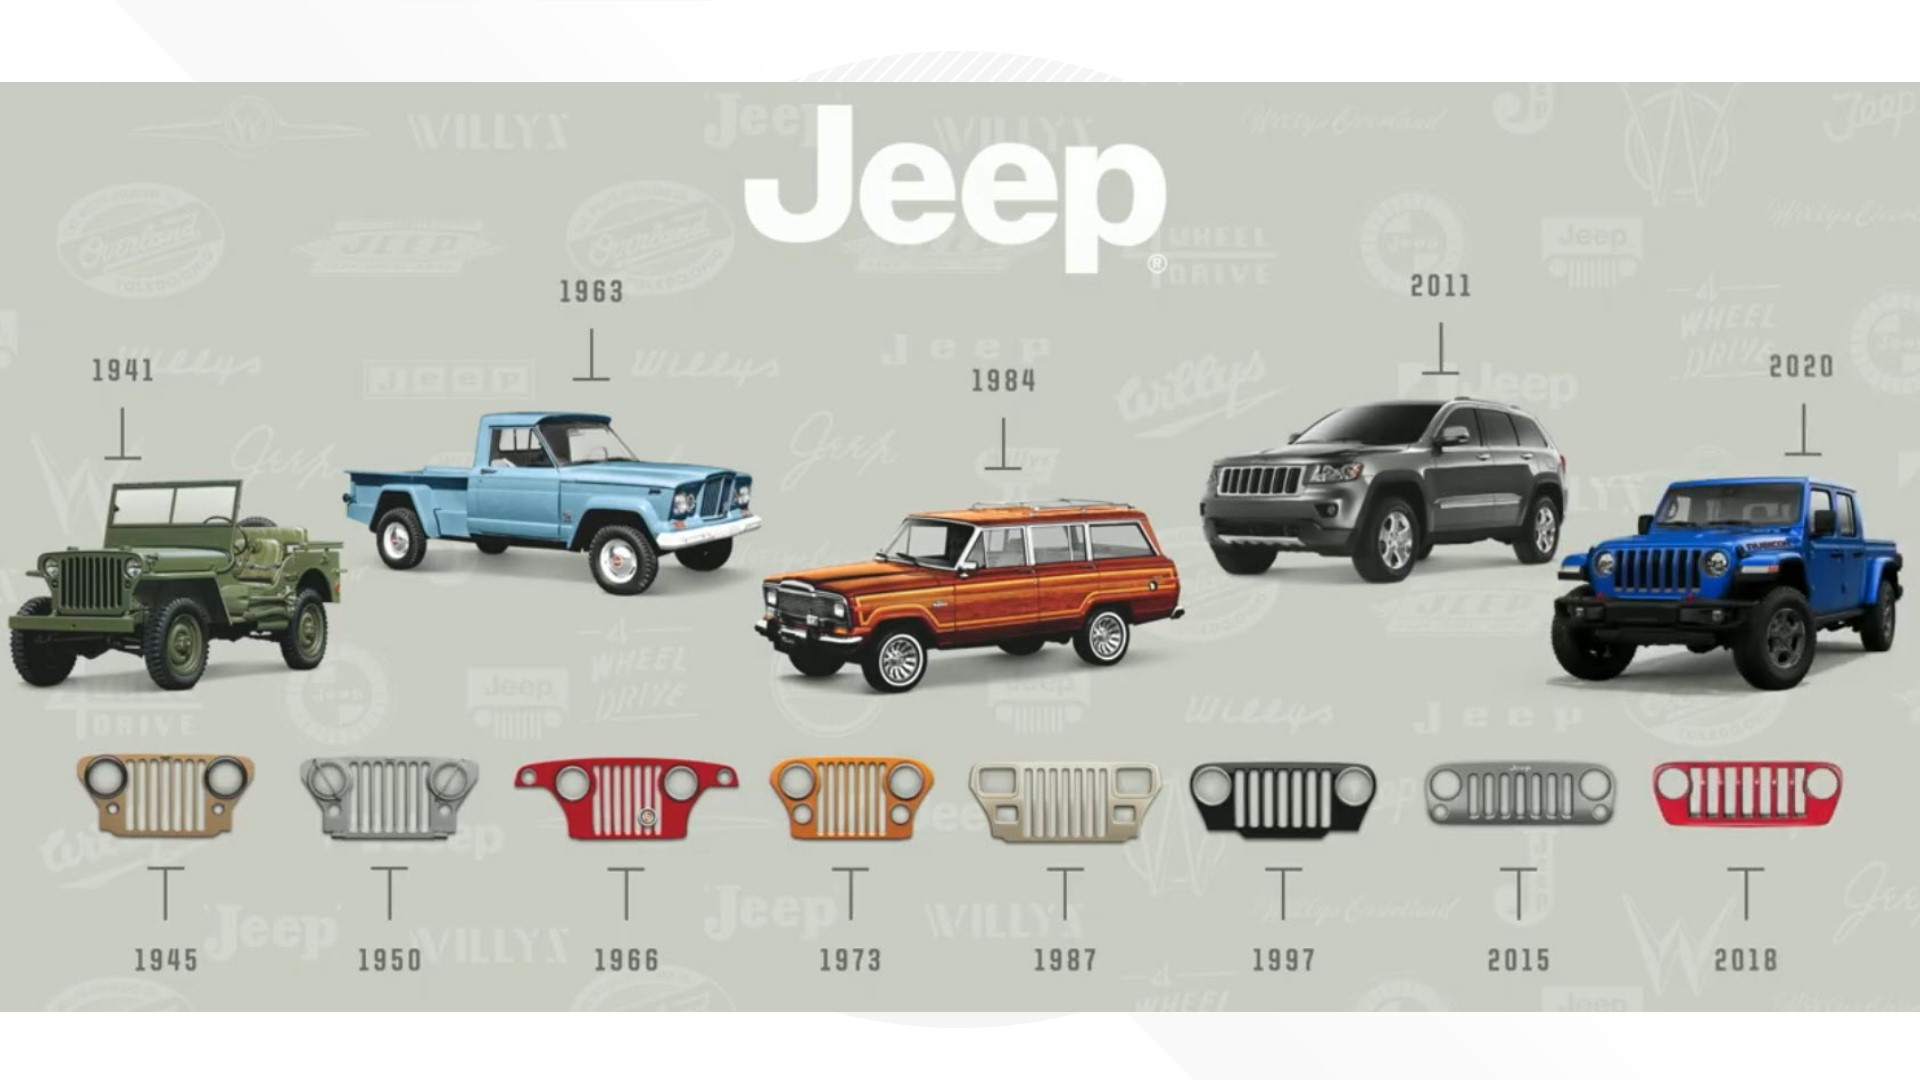 The return of the Jeep Grand Wagoneer and the reveal of the 2021 Toledo-built Jeep Wrangler 4xe is heralded.